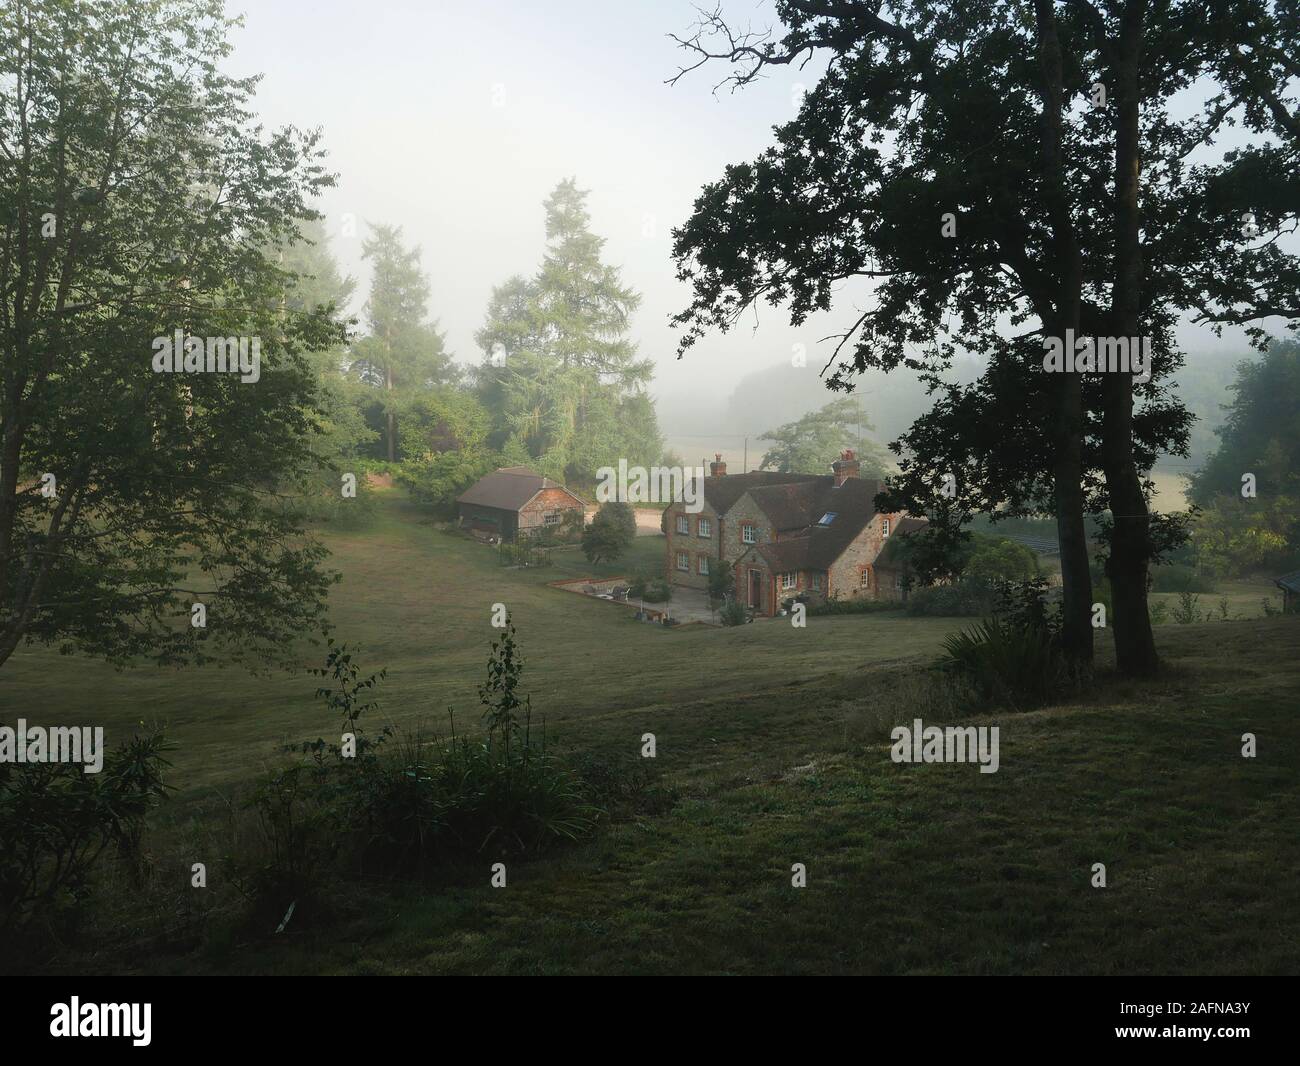 Quintessential English Country cottage in misty valley surrounded by trees Stock Photo